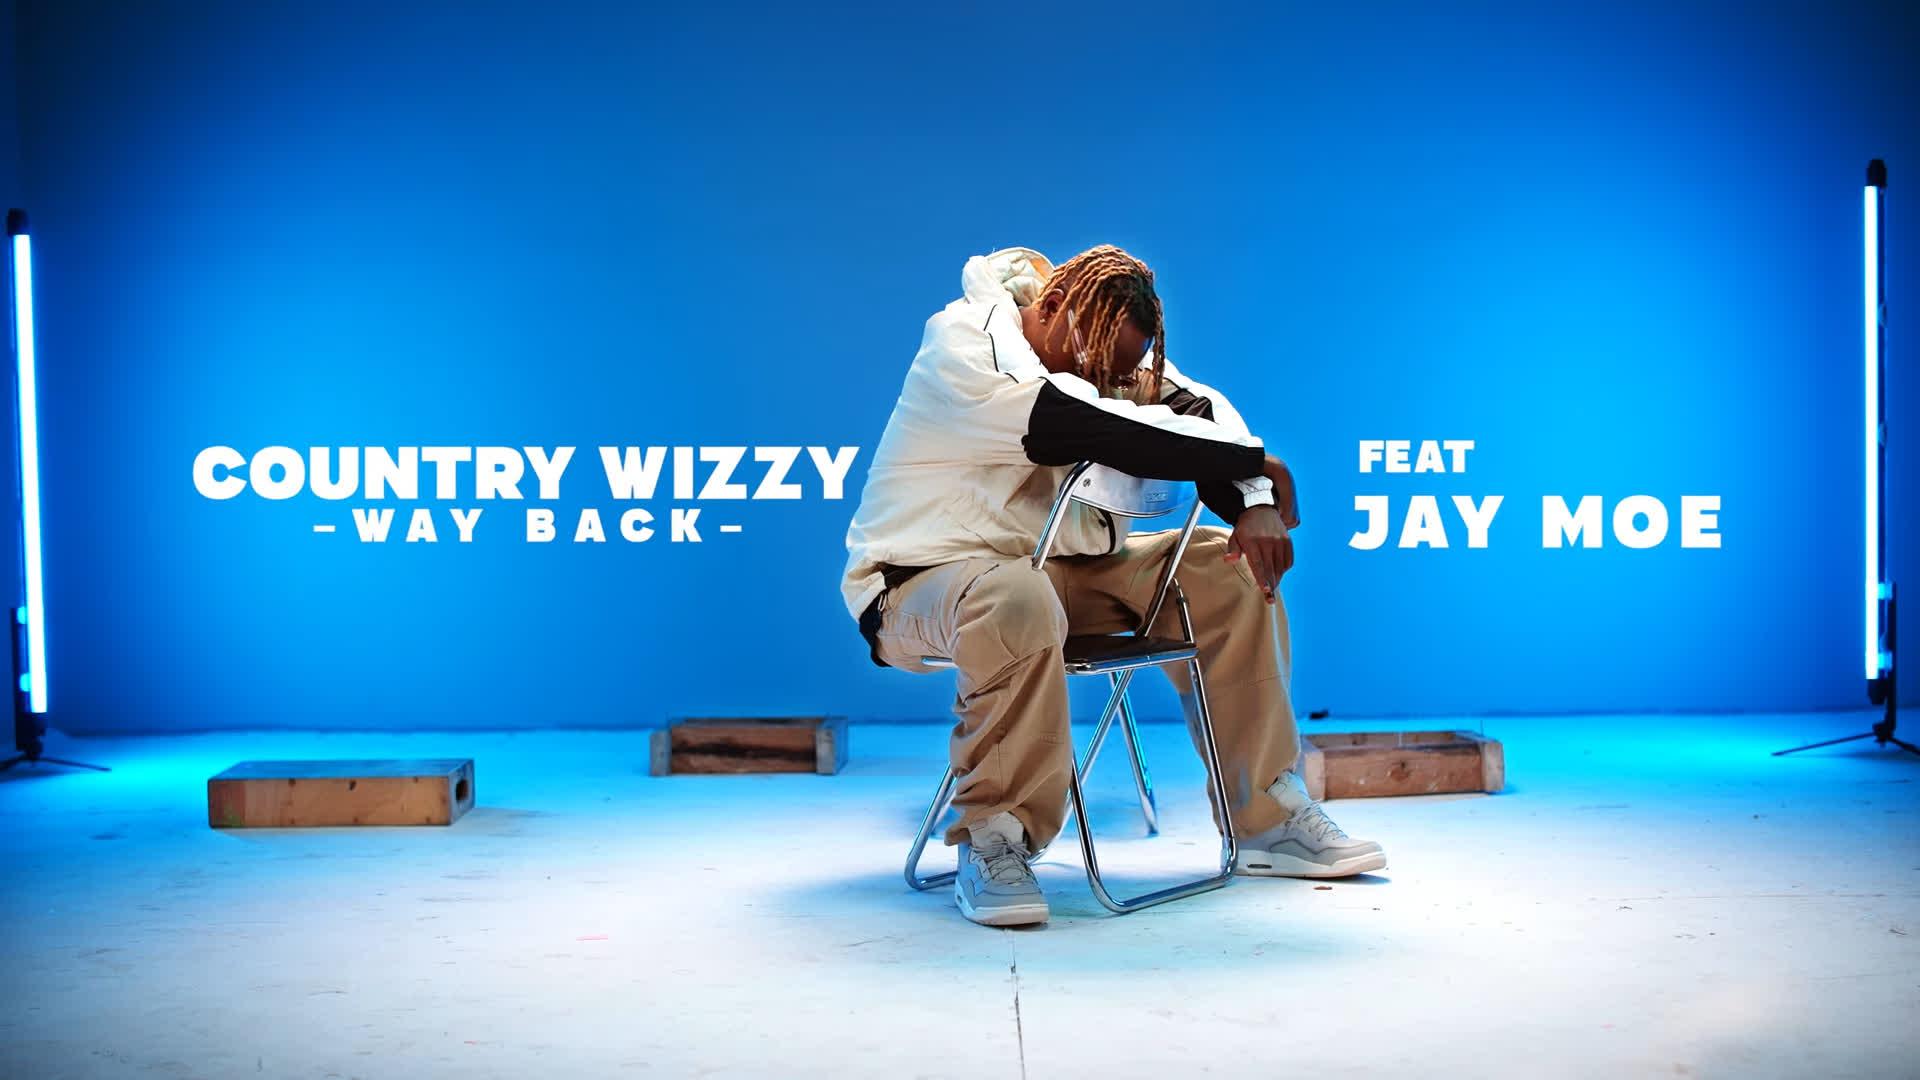 Way Back By Country Wizzy Ft. Jay Moe